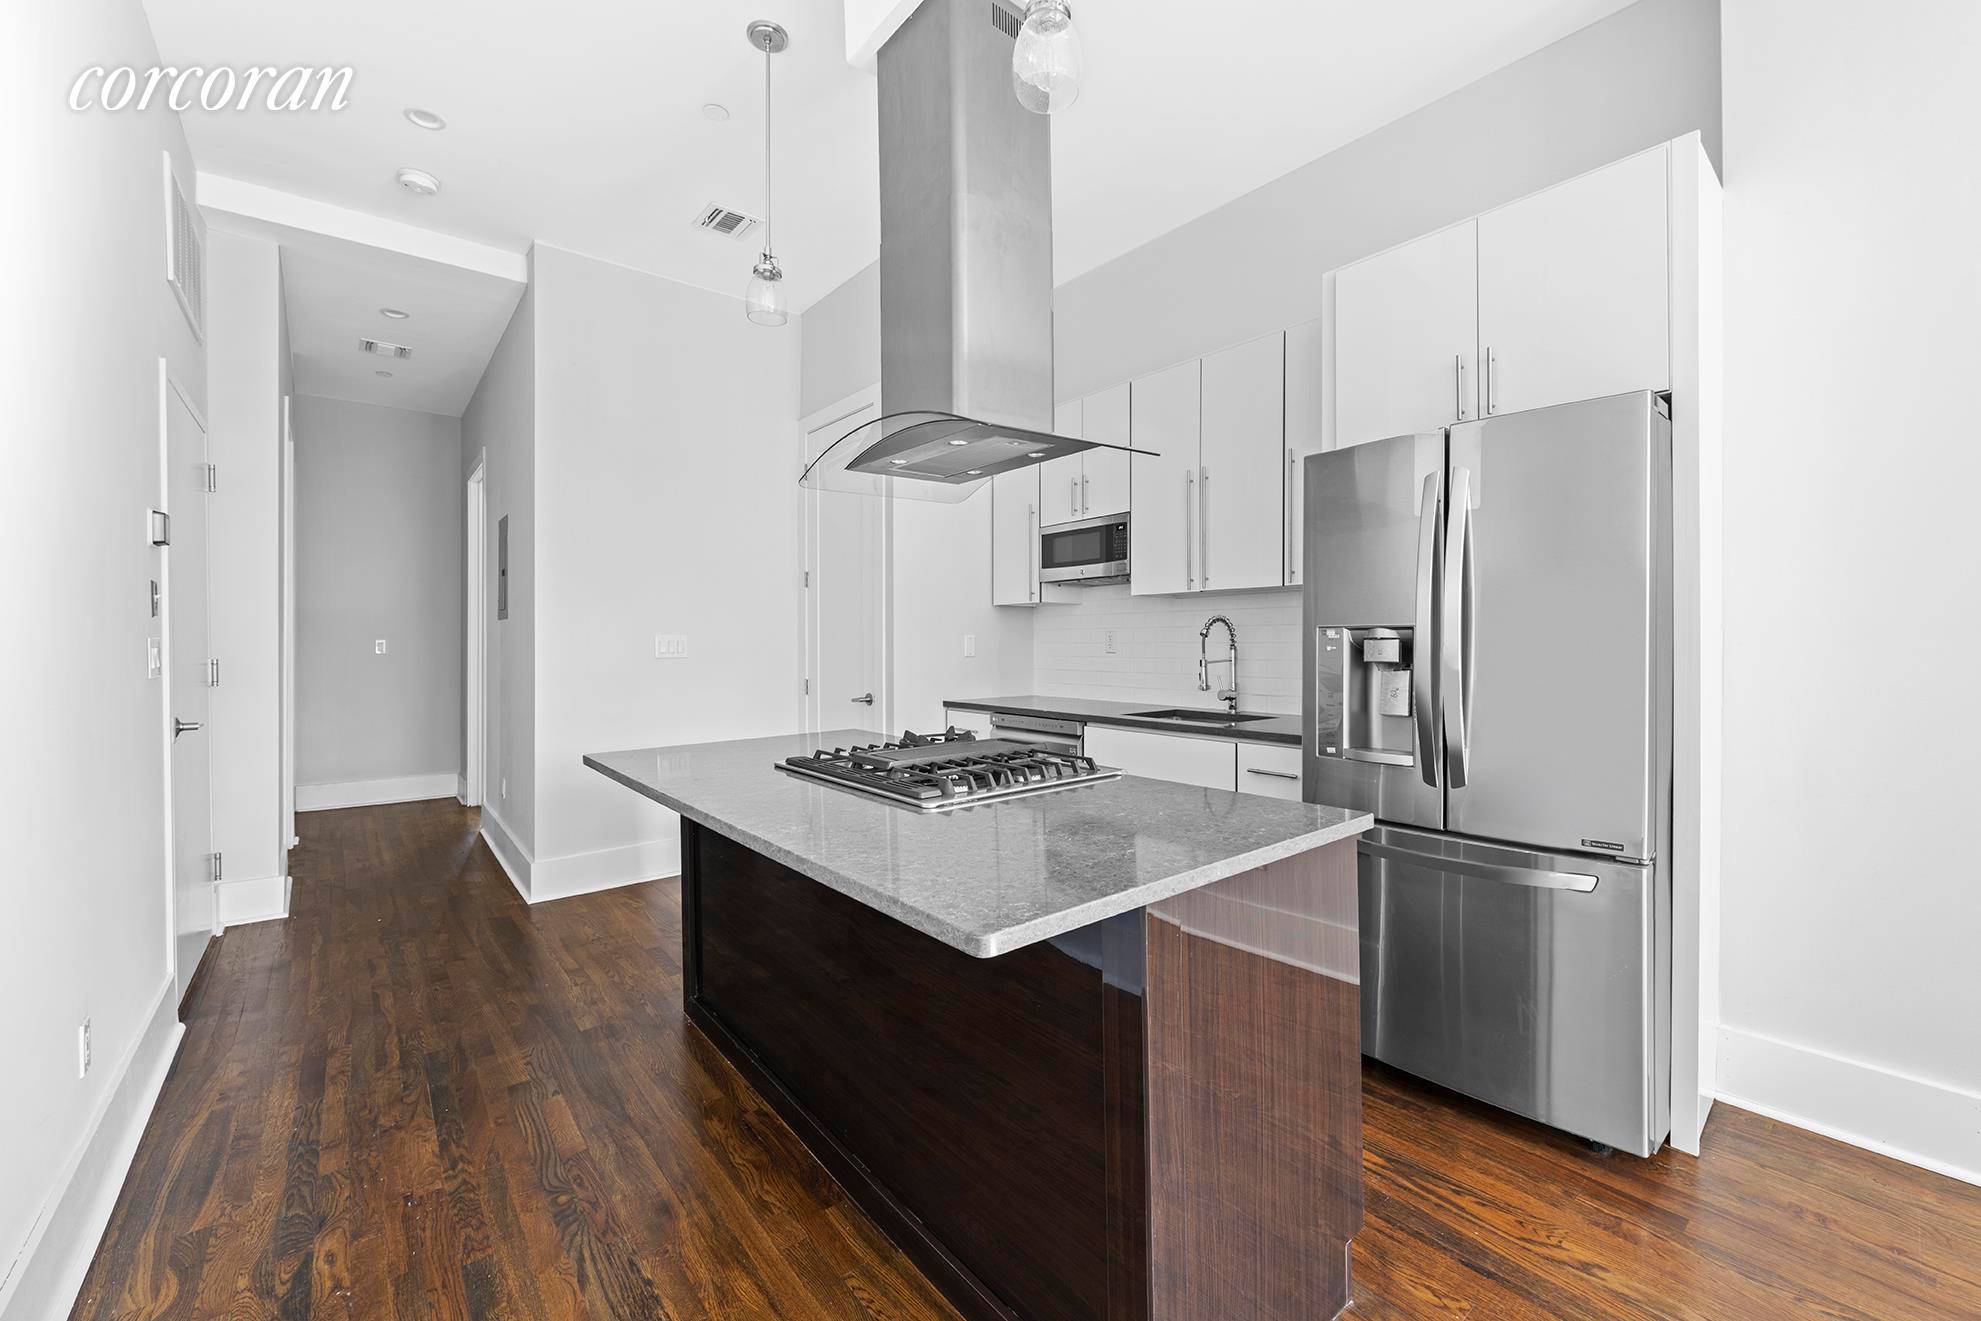 Welcome to 1264 Hancock St, a boutique collection of three, floor through condos in Bushwick, Brooklyn.